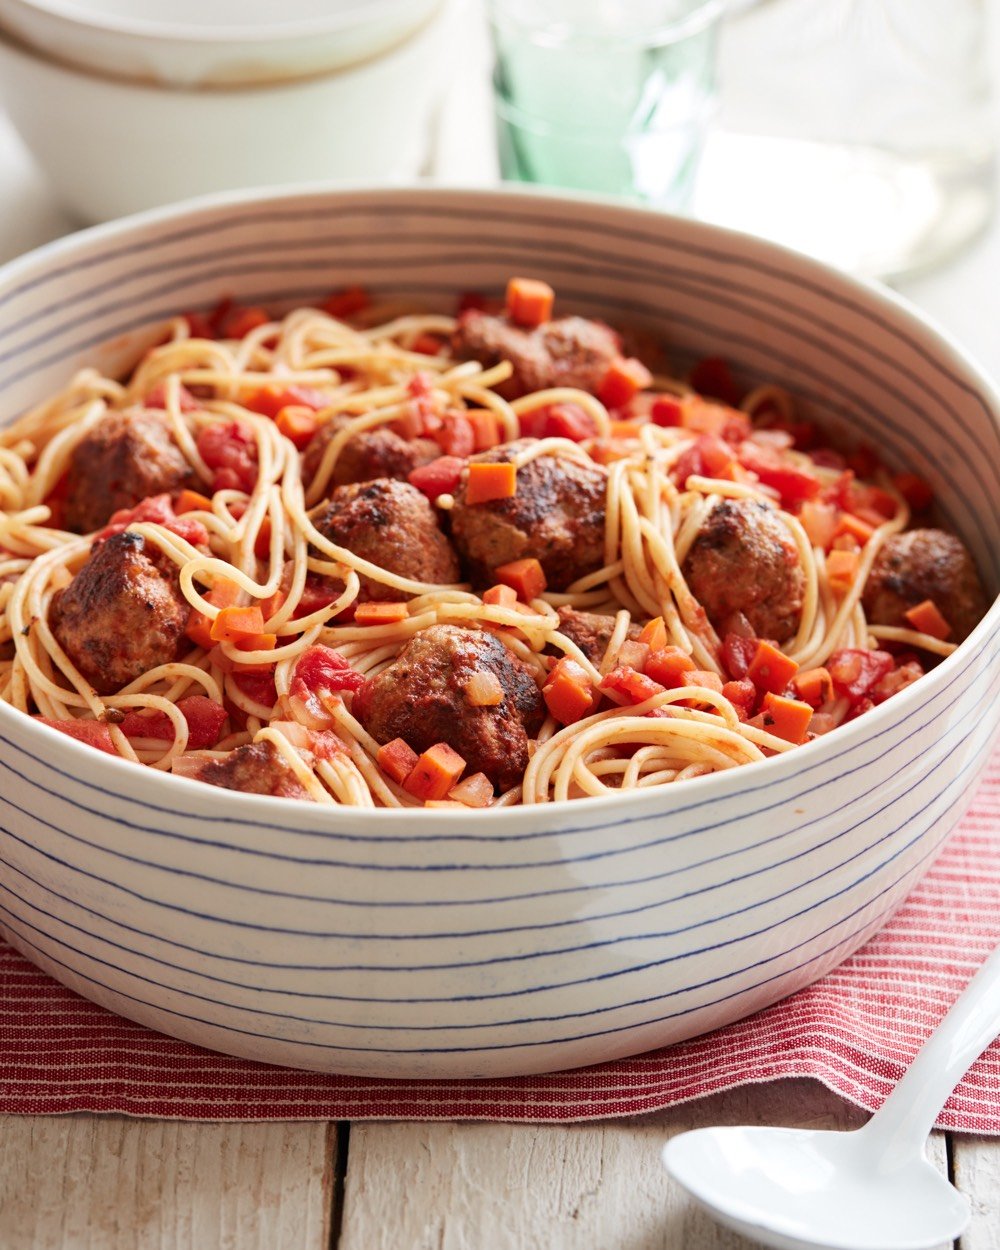 Spaghetti with Turkey Meatballs from weelicious.com